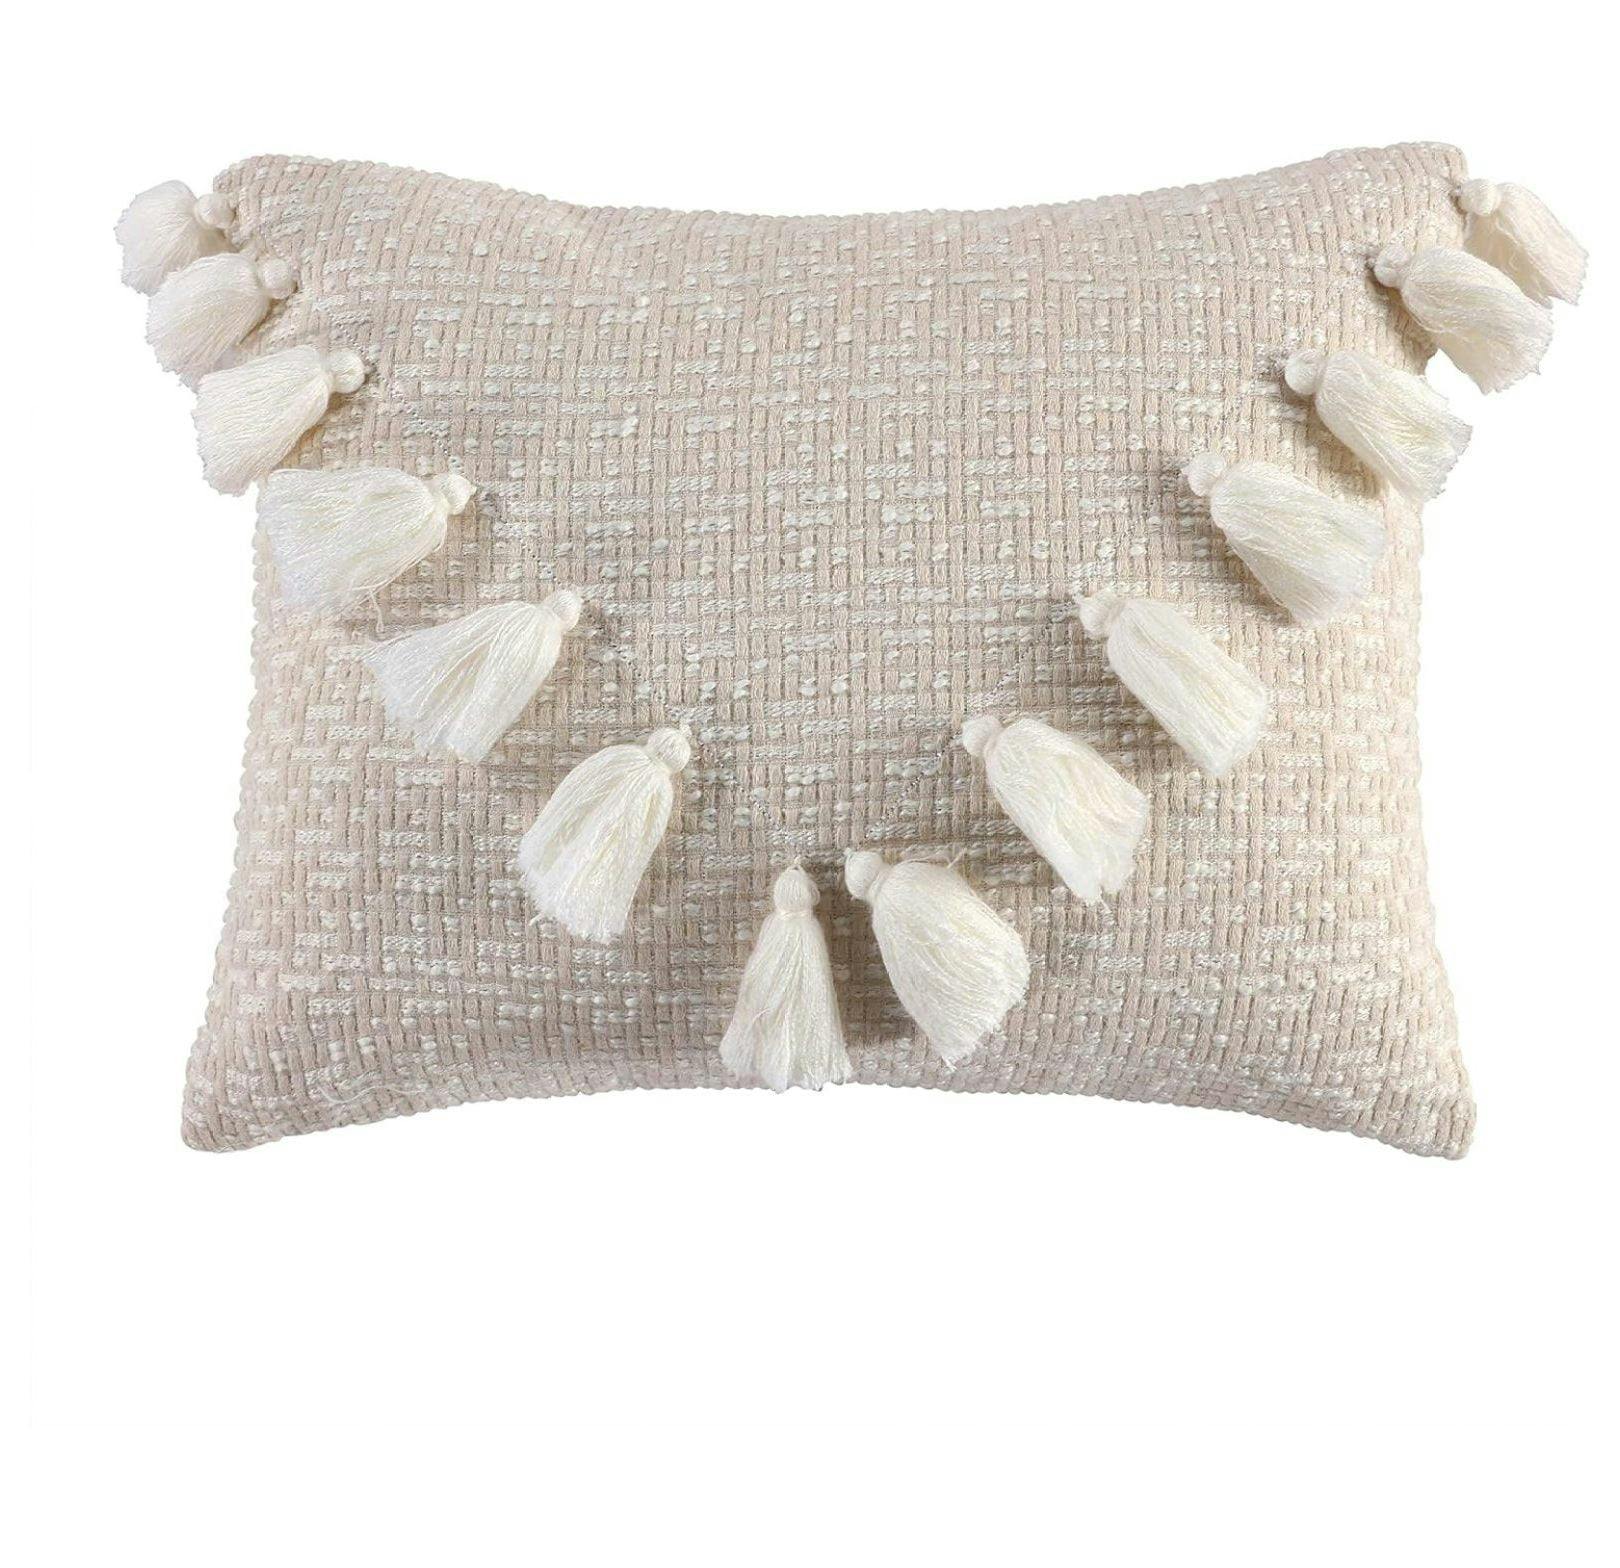 Taupe Cream Embroidered Tassel Decorative Pillow 14x18